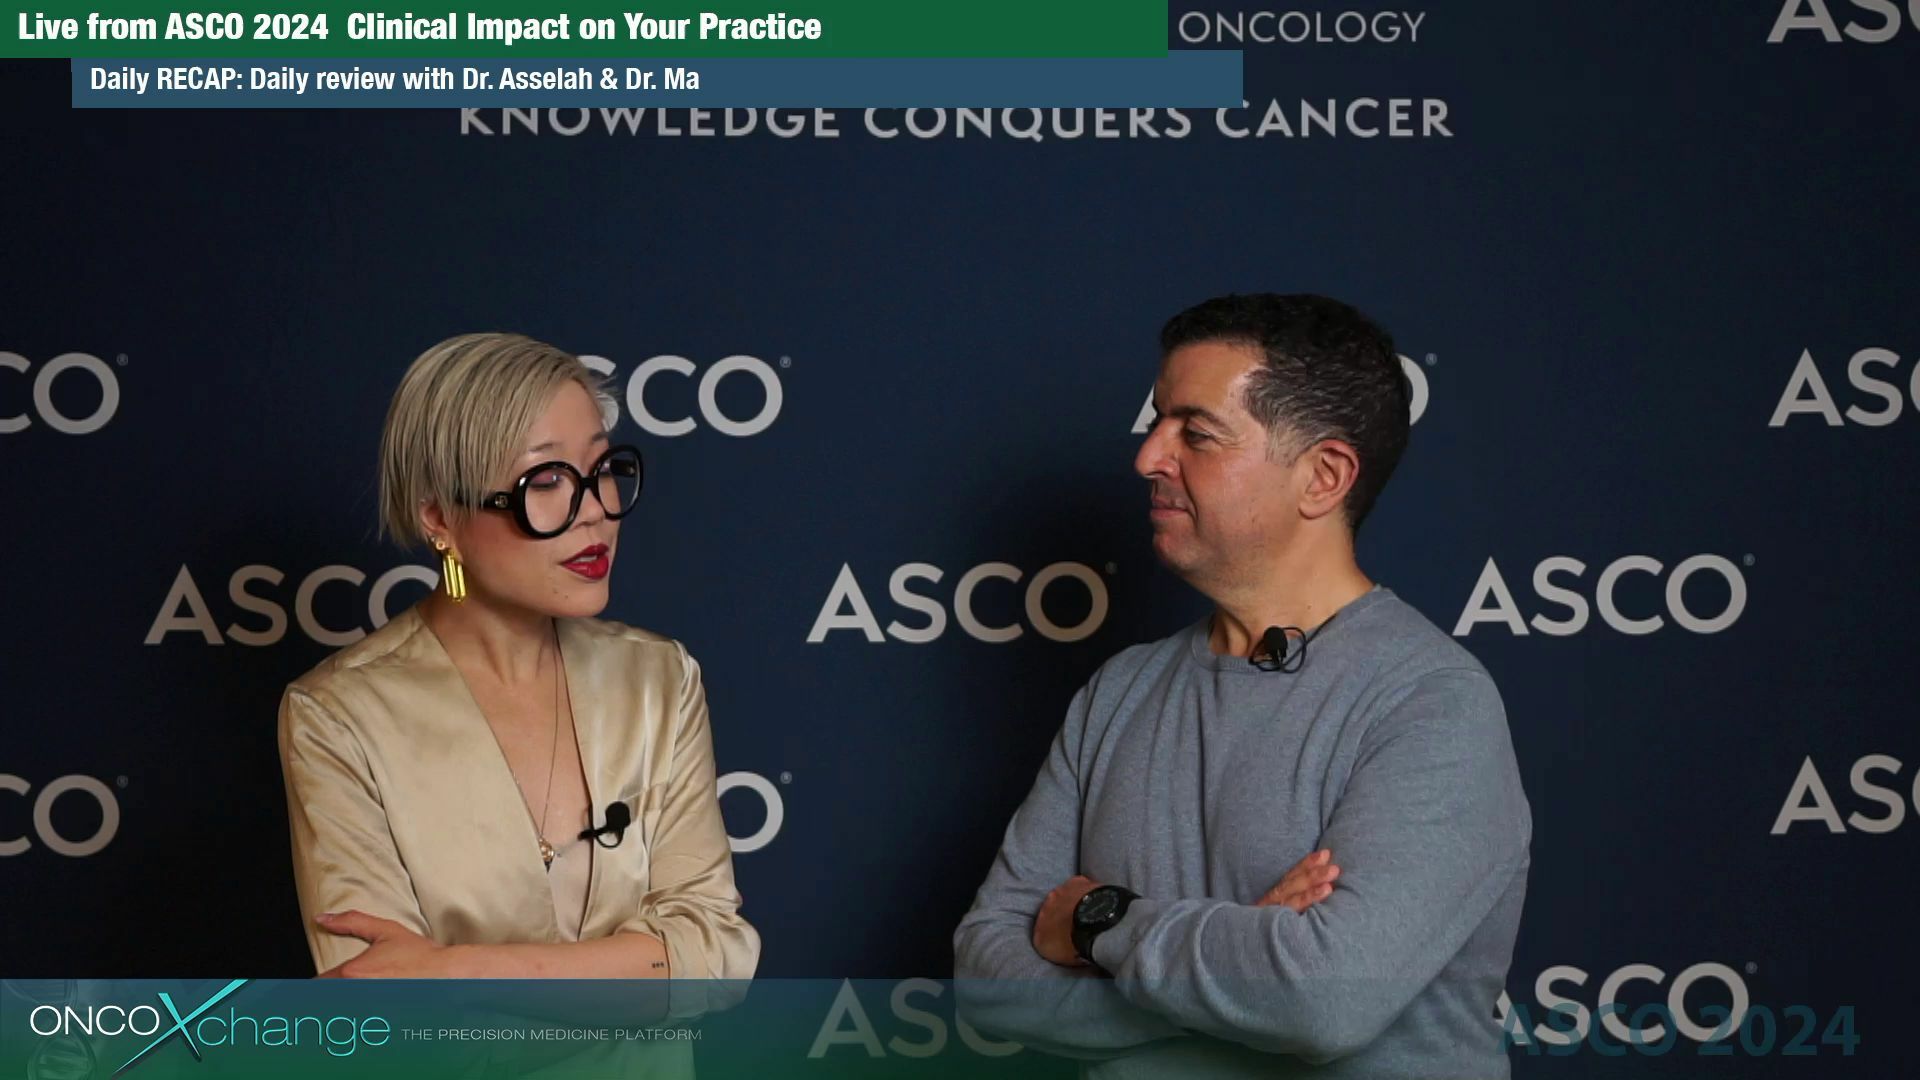 ay 1 Highlights of ASCO: Drs. Asselah and Ma Review key takeaways